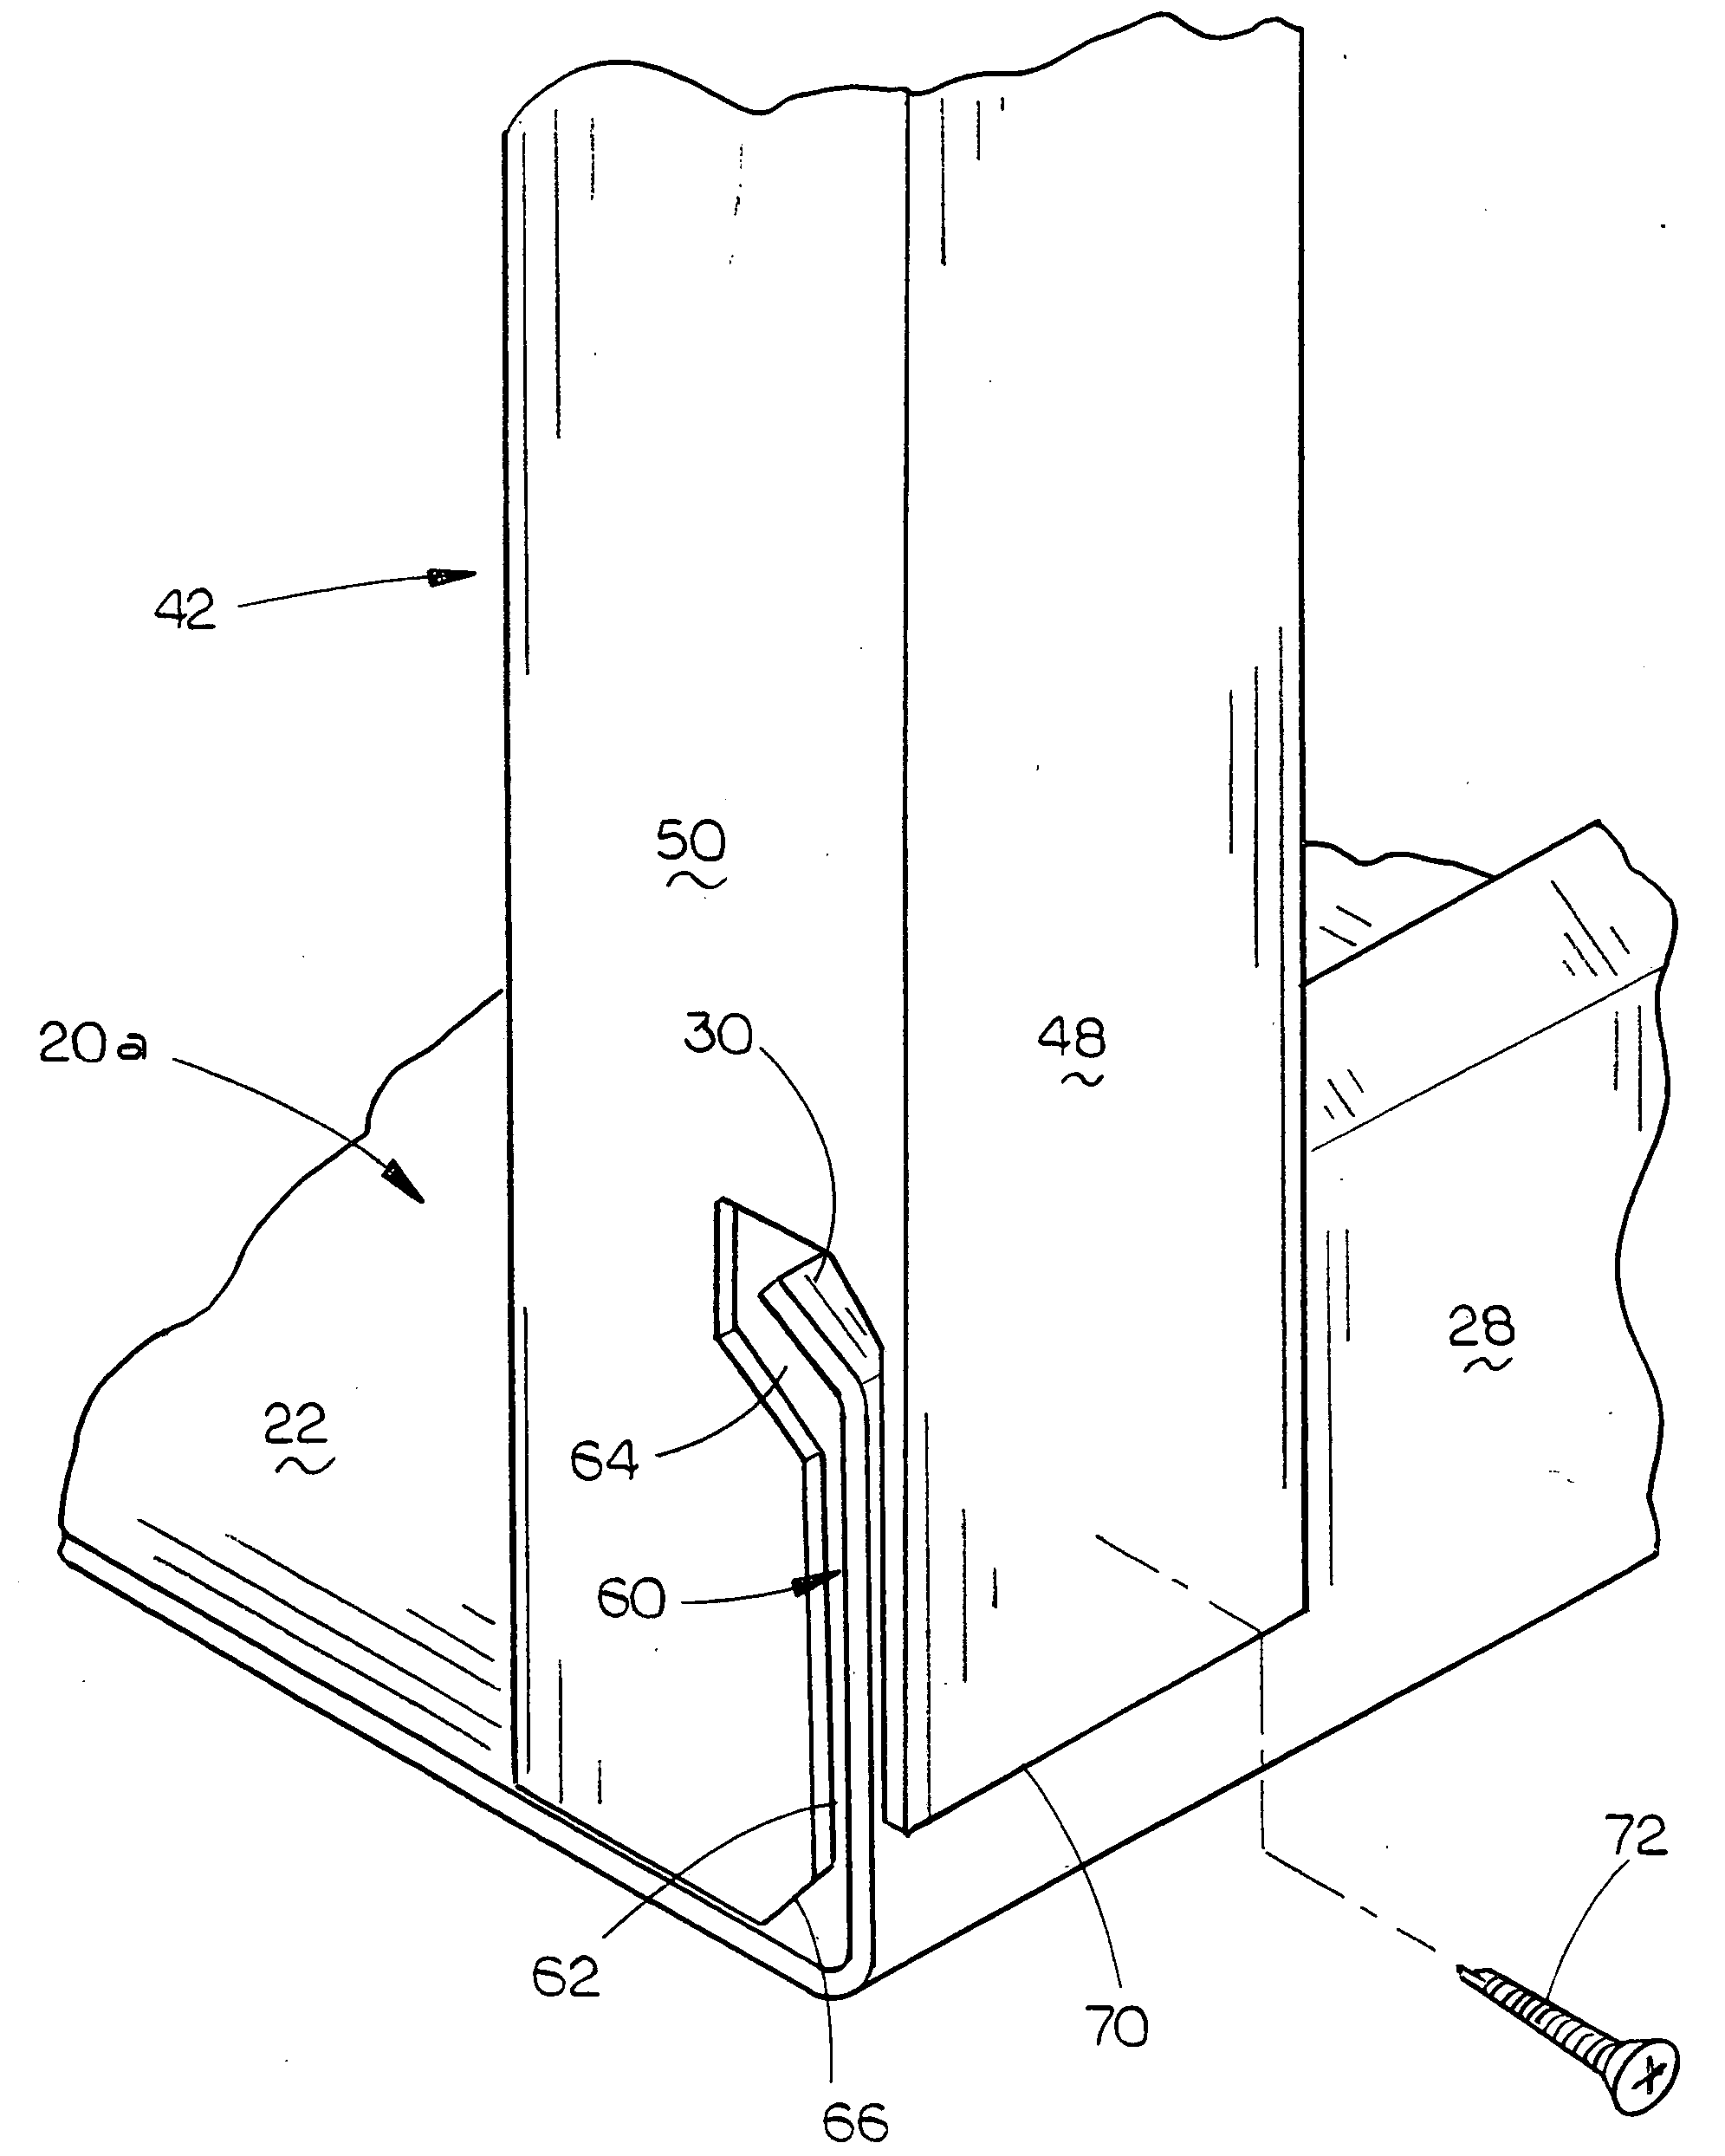 Metal stud for a wall or roof system